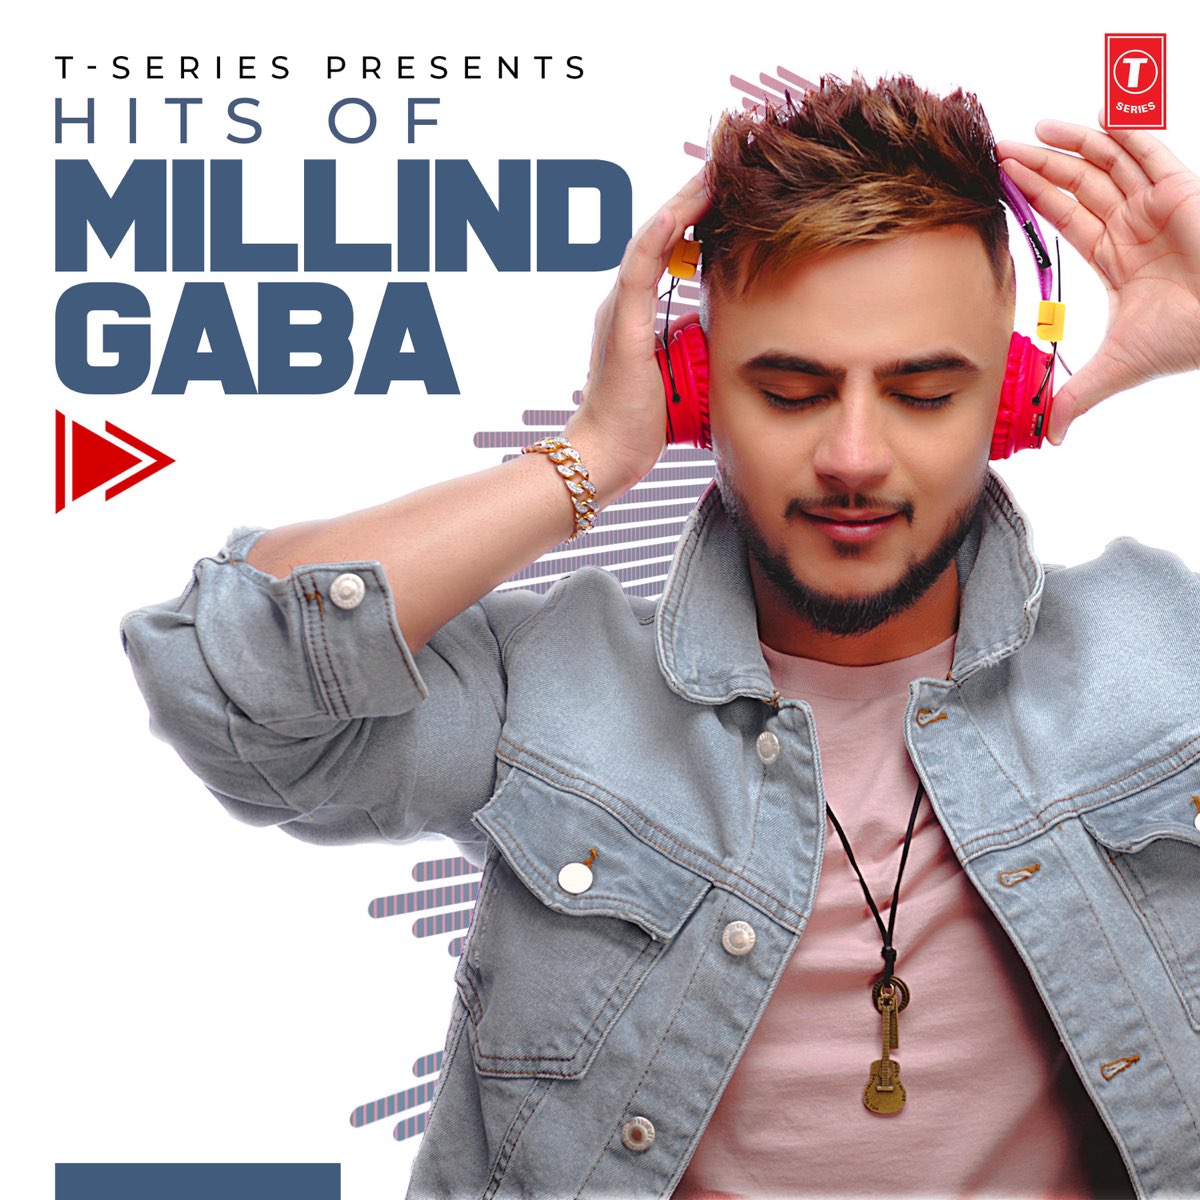 Millind Gaba Singer HD Pictures Wallpapers  Whatsapp Images